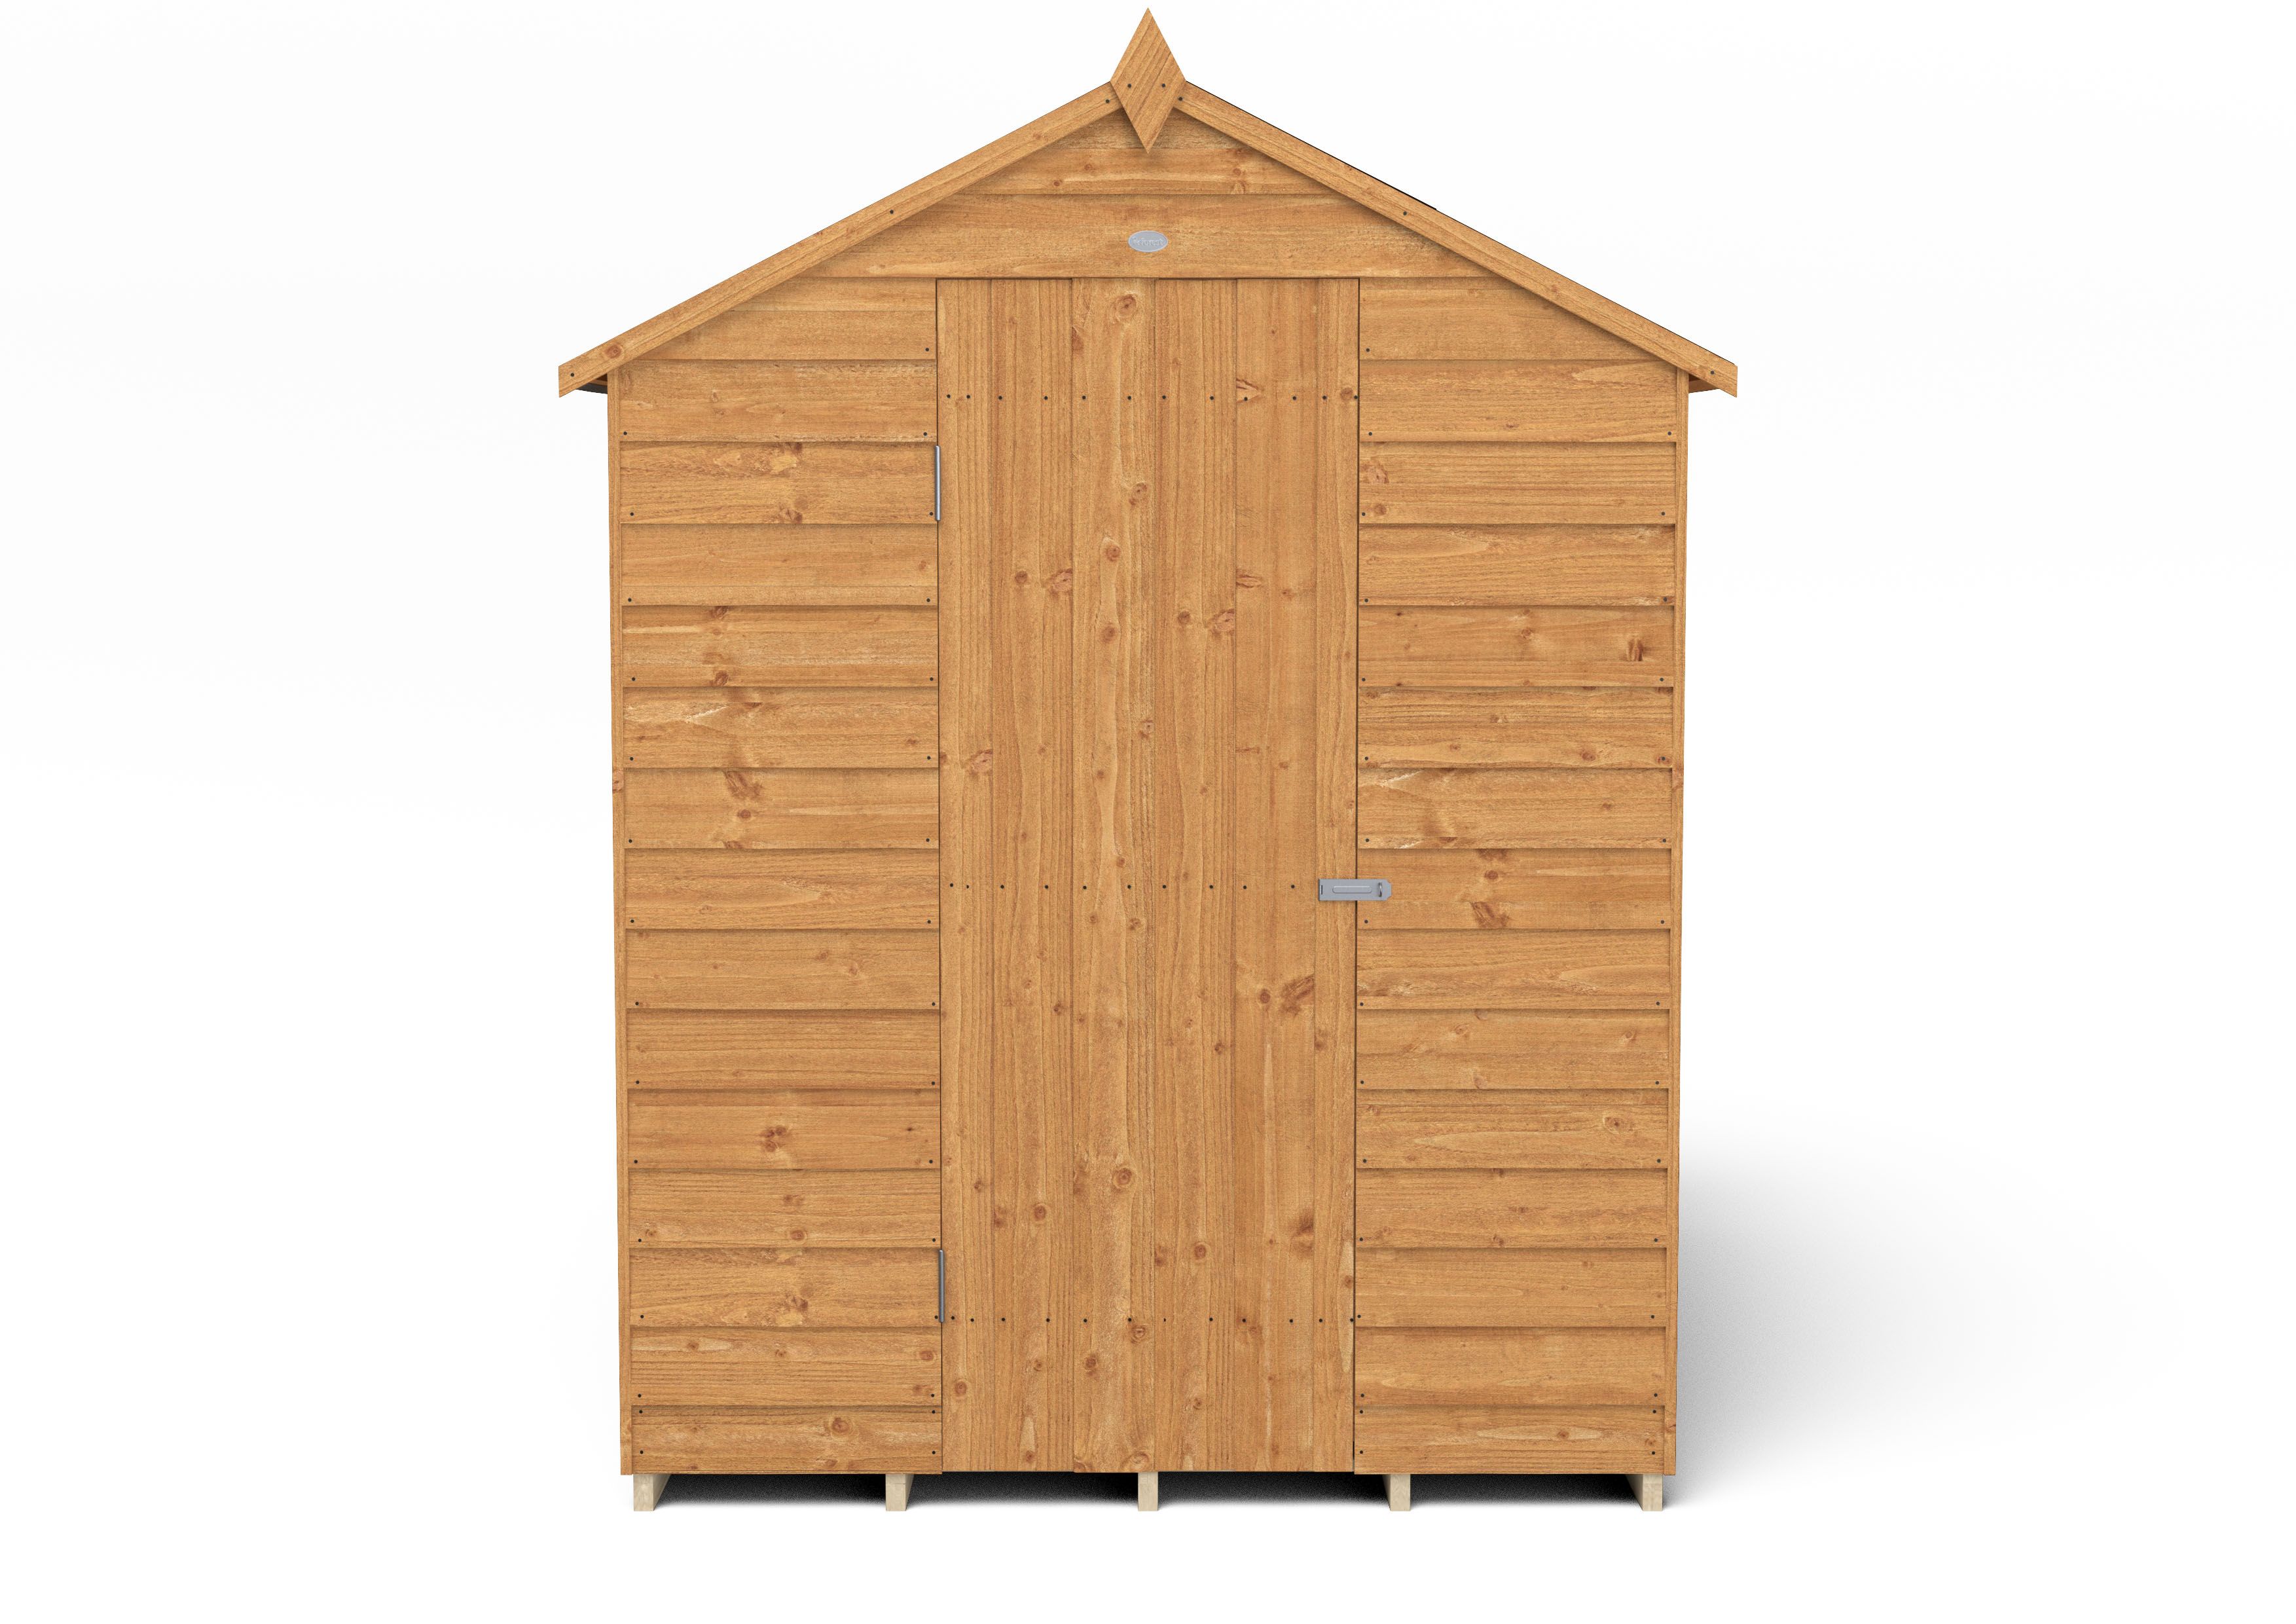 Forest Garden Overlap 7x5 ft Apex Wooden Dip treated Shed with floor (Base included)